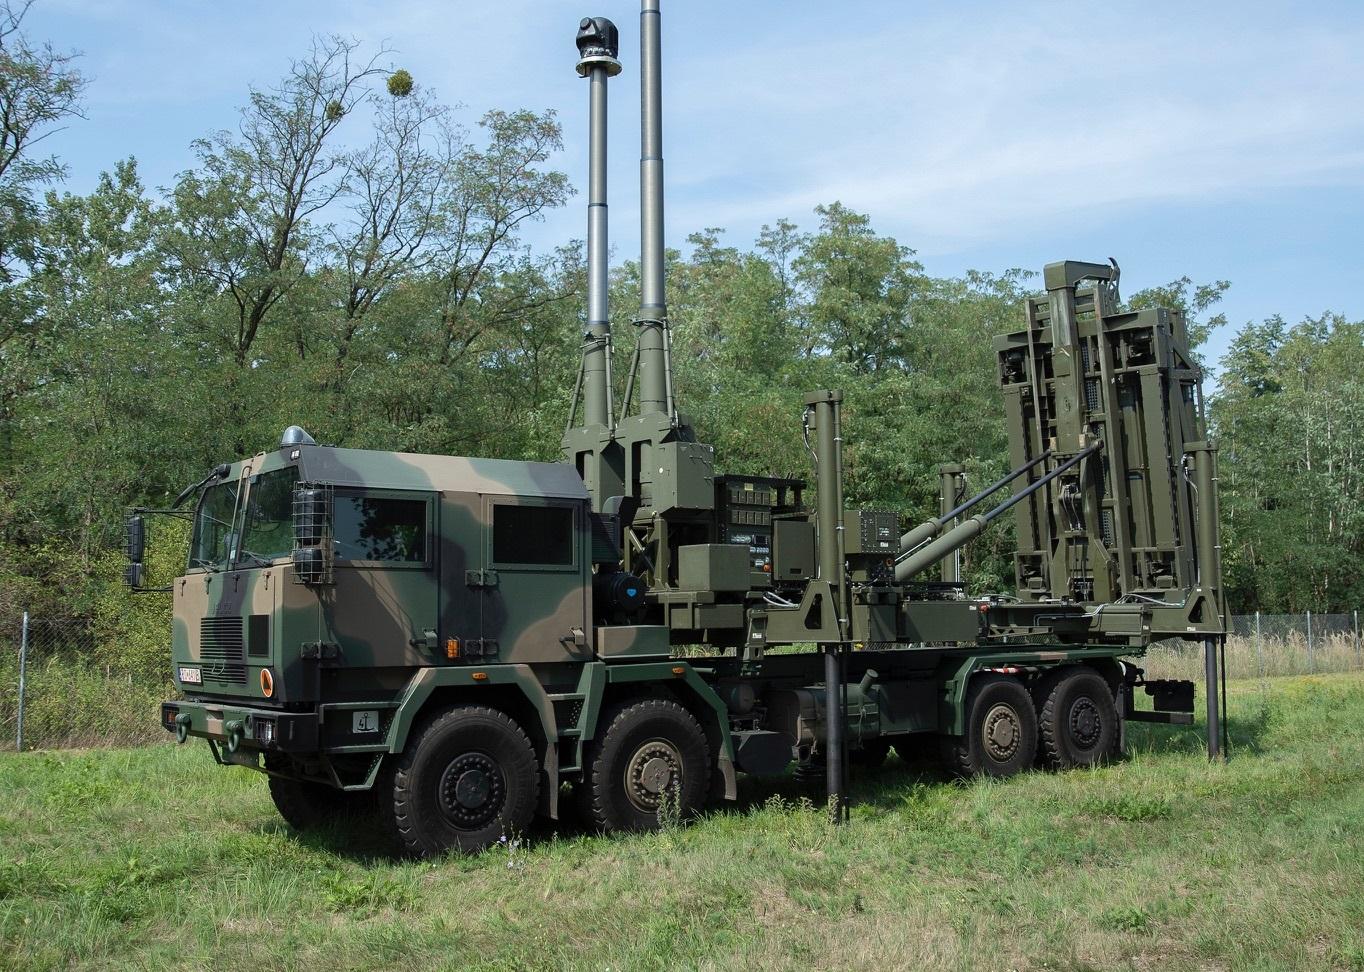 CAMM (Common Anti-air Modular Missile) air defense solution on Polish Jelcz Tactical Vehicle